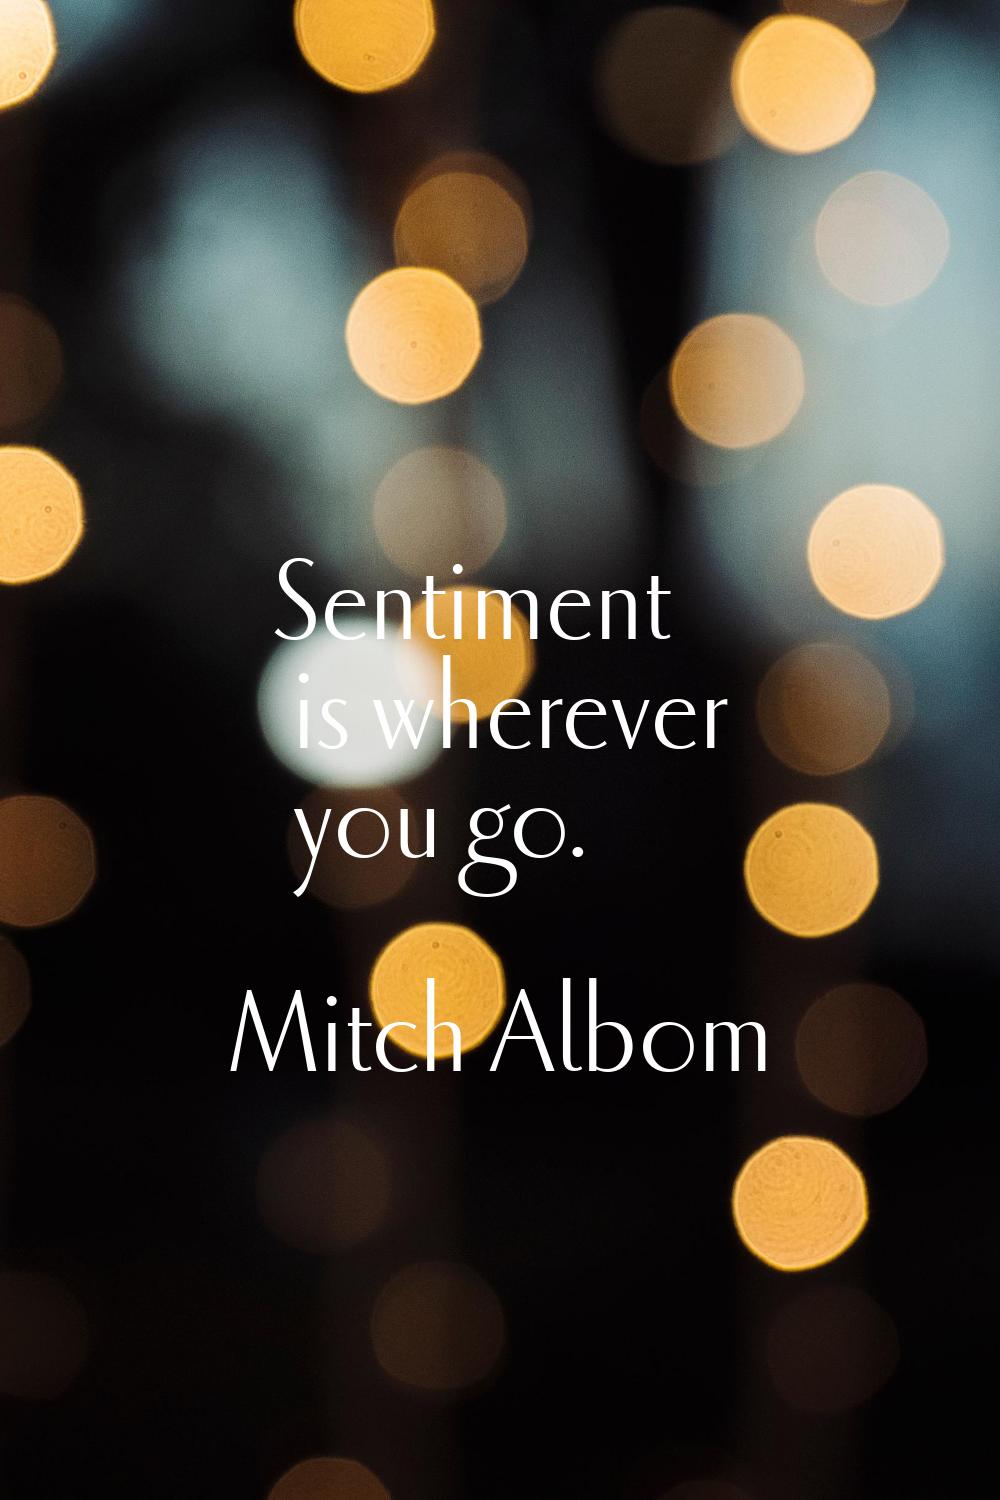 Sentiment is wherever you go.